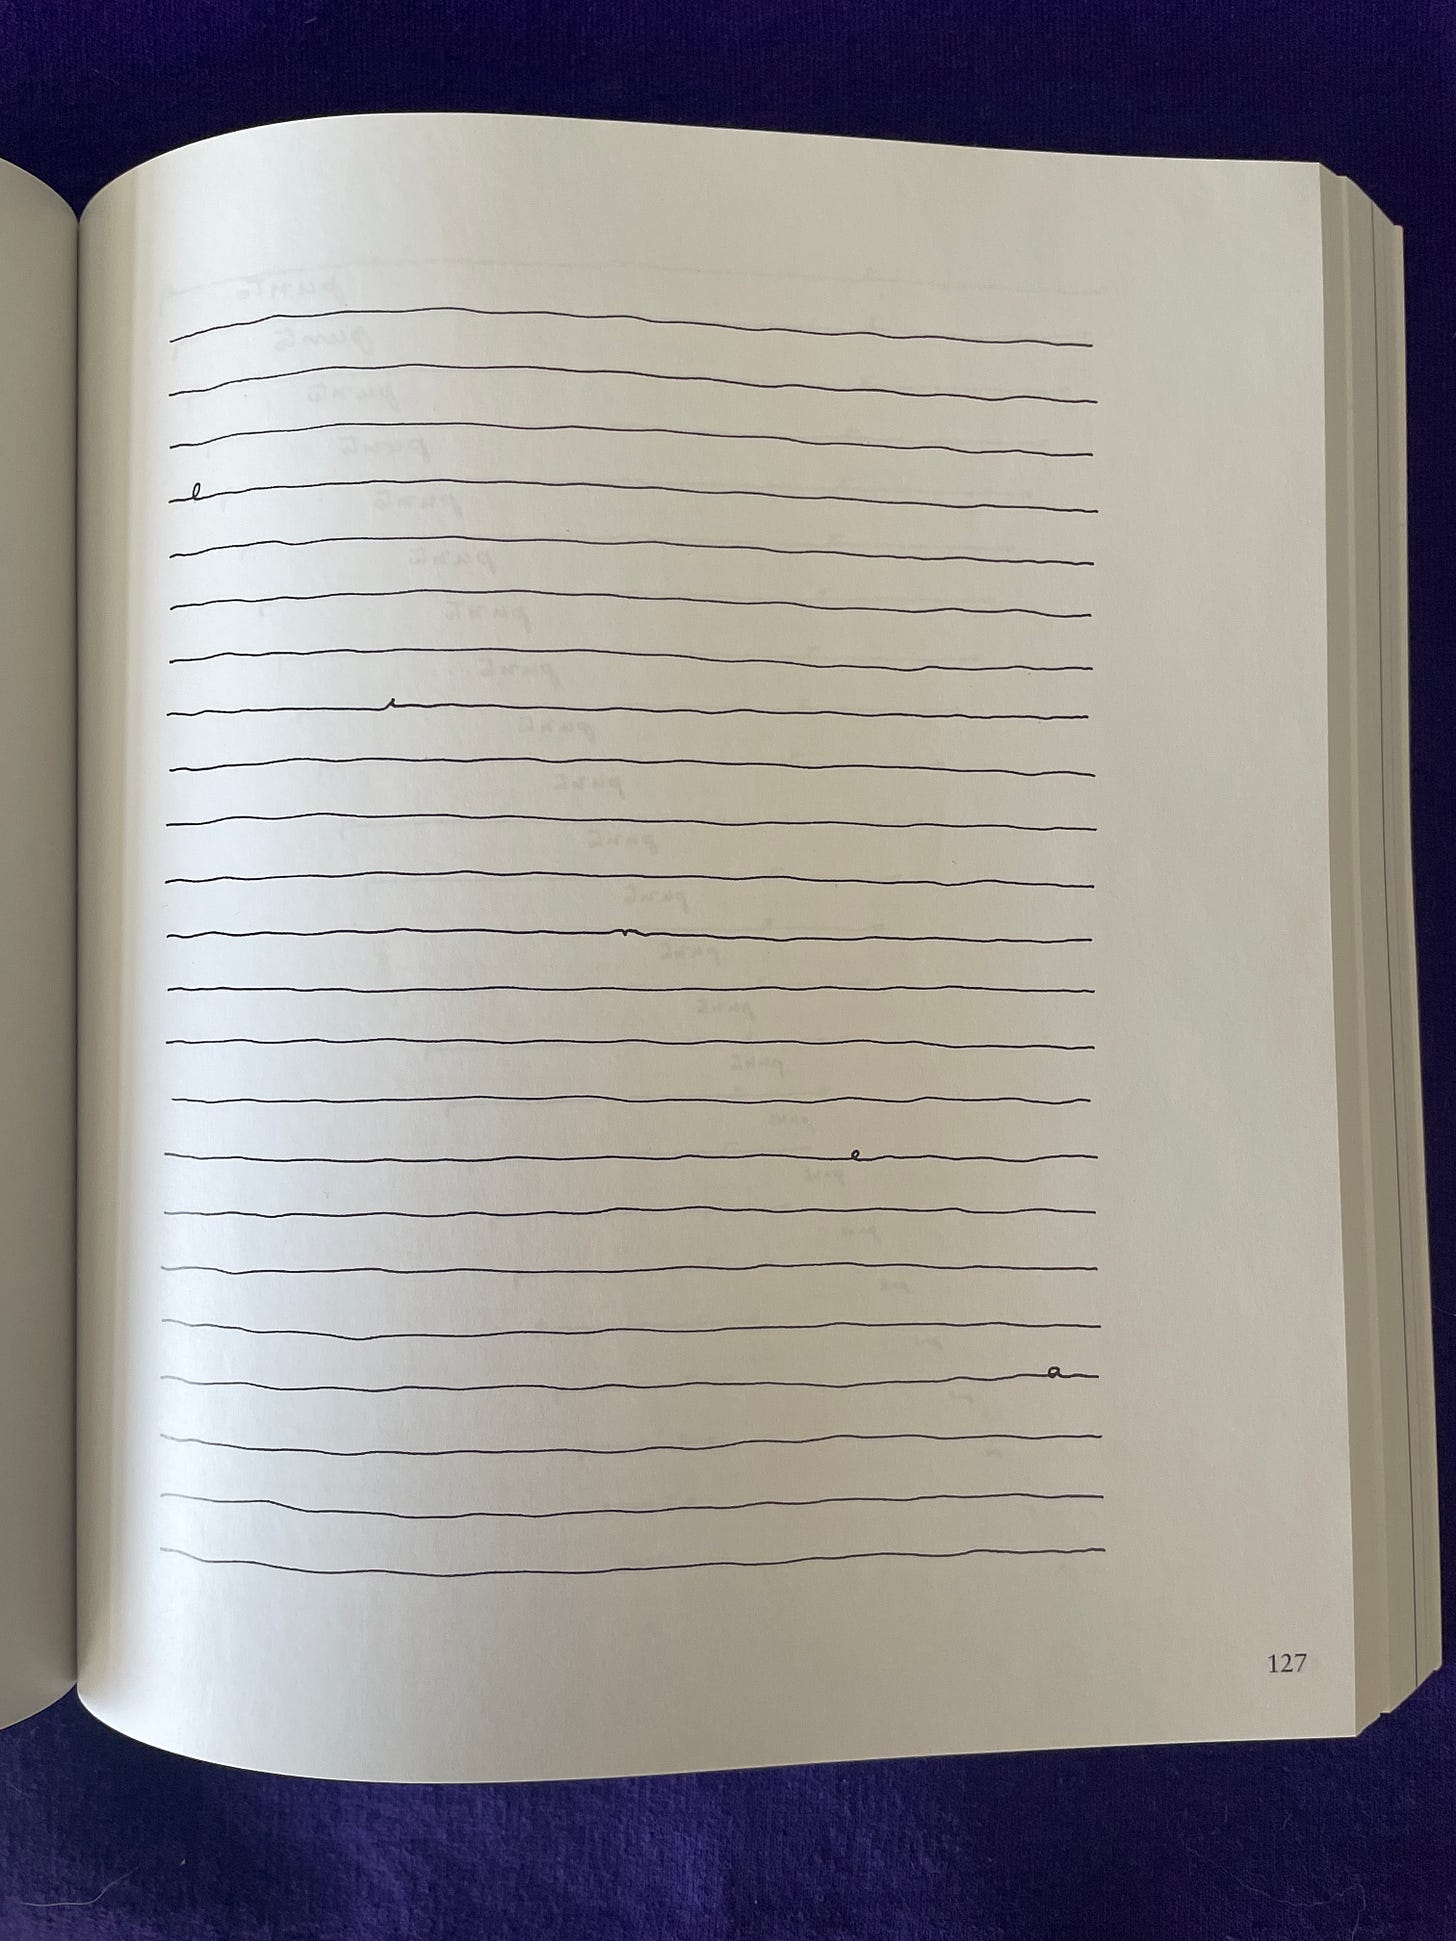 The letters of the word “linea” (line) written diagonally down the page in small swirls of letters, using some of the straight lines lines.